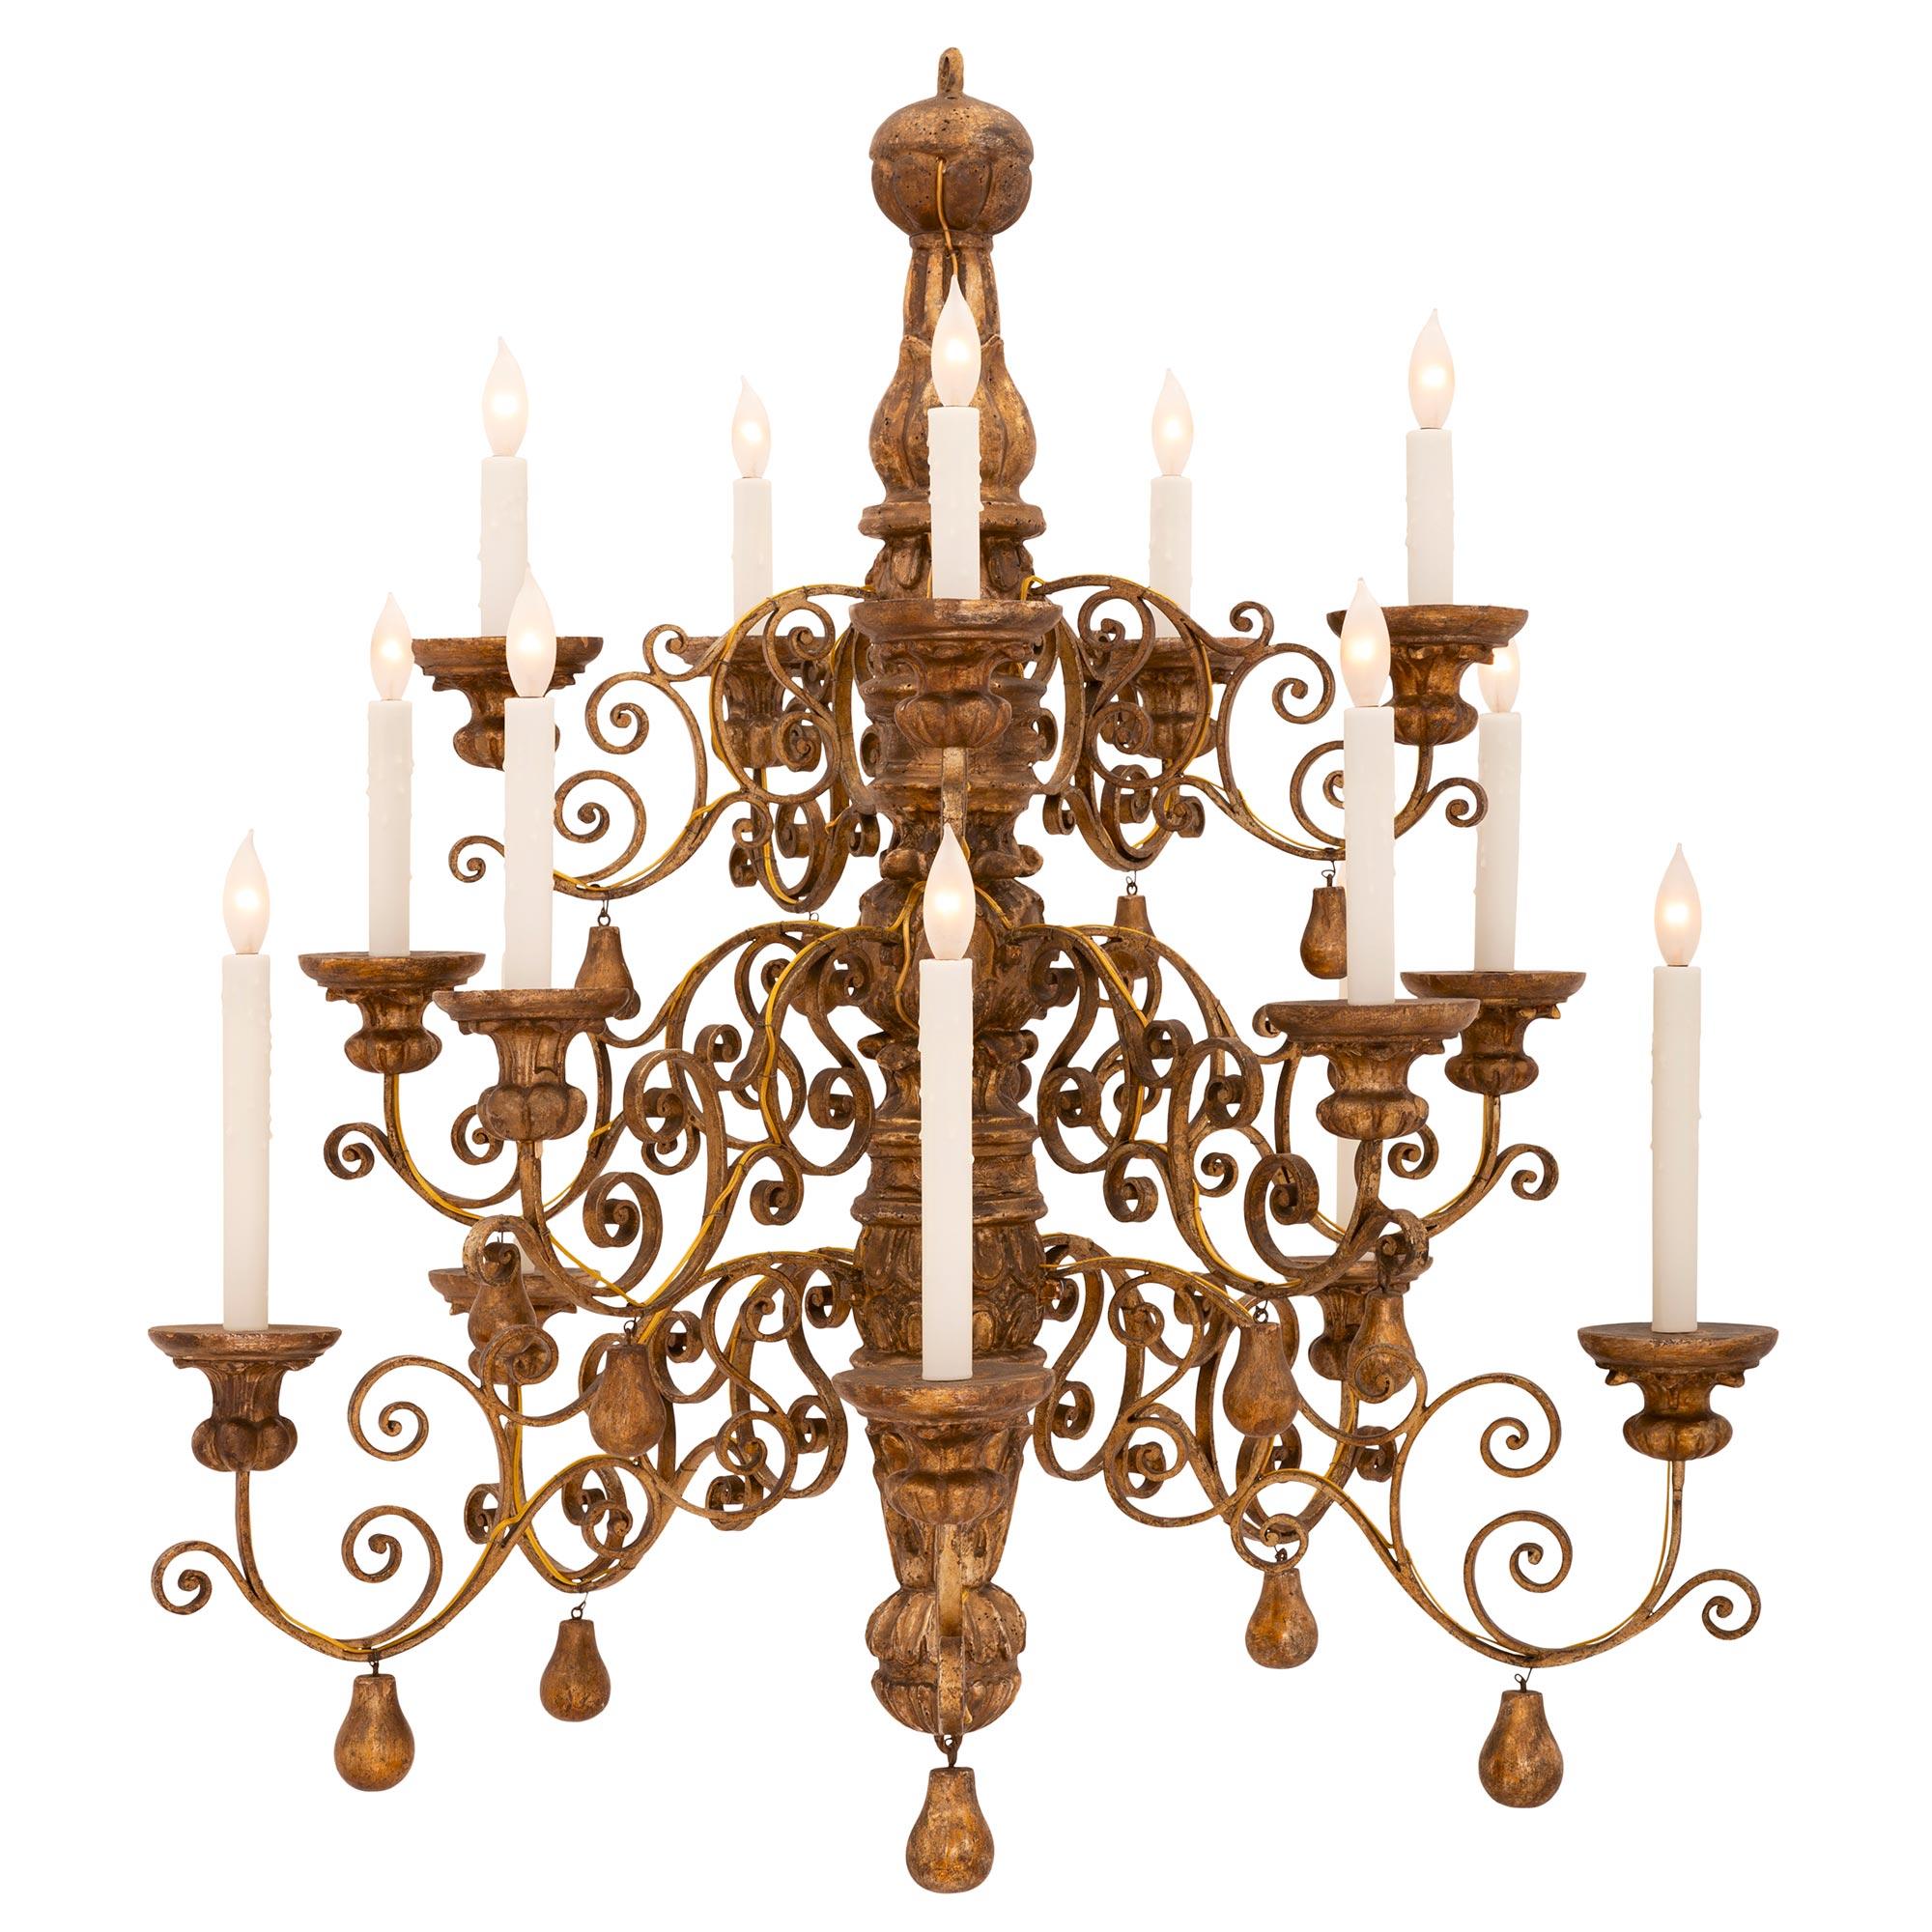 A unique and extremely decorative Italian 18th century Louis XIV period mecca and gilt metal chandelier. The fifteen arm chandelier is centered by a fine carved pear shaped bottom finial also repeated at each of the wonderfully scrolled arms. The